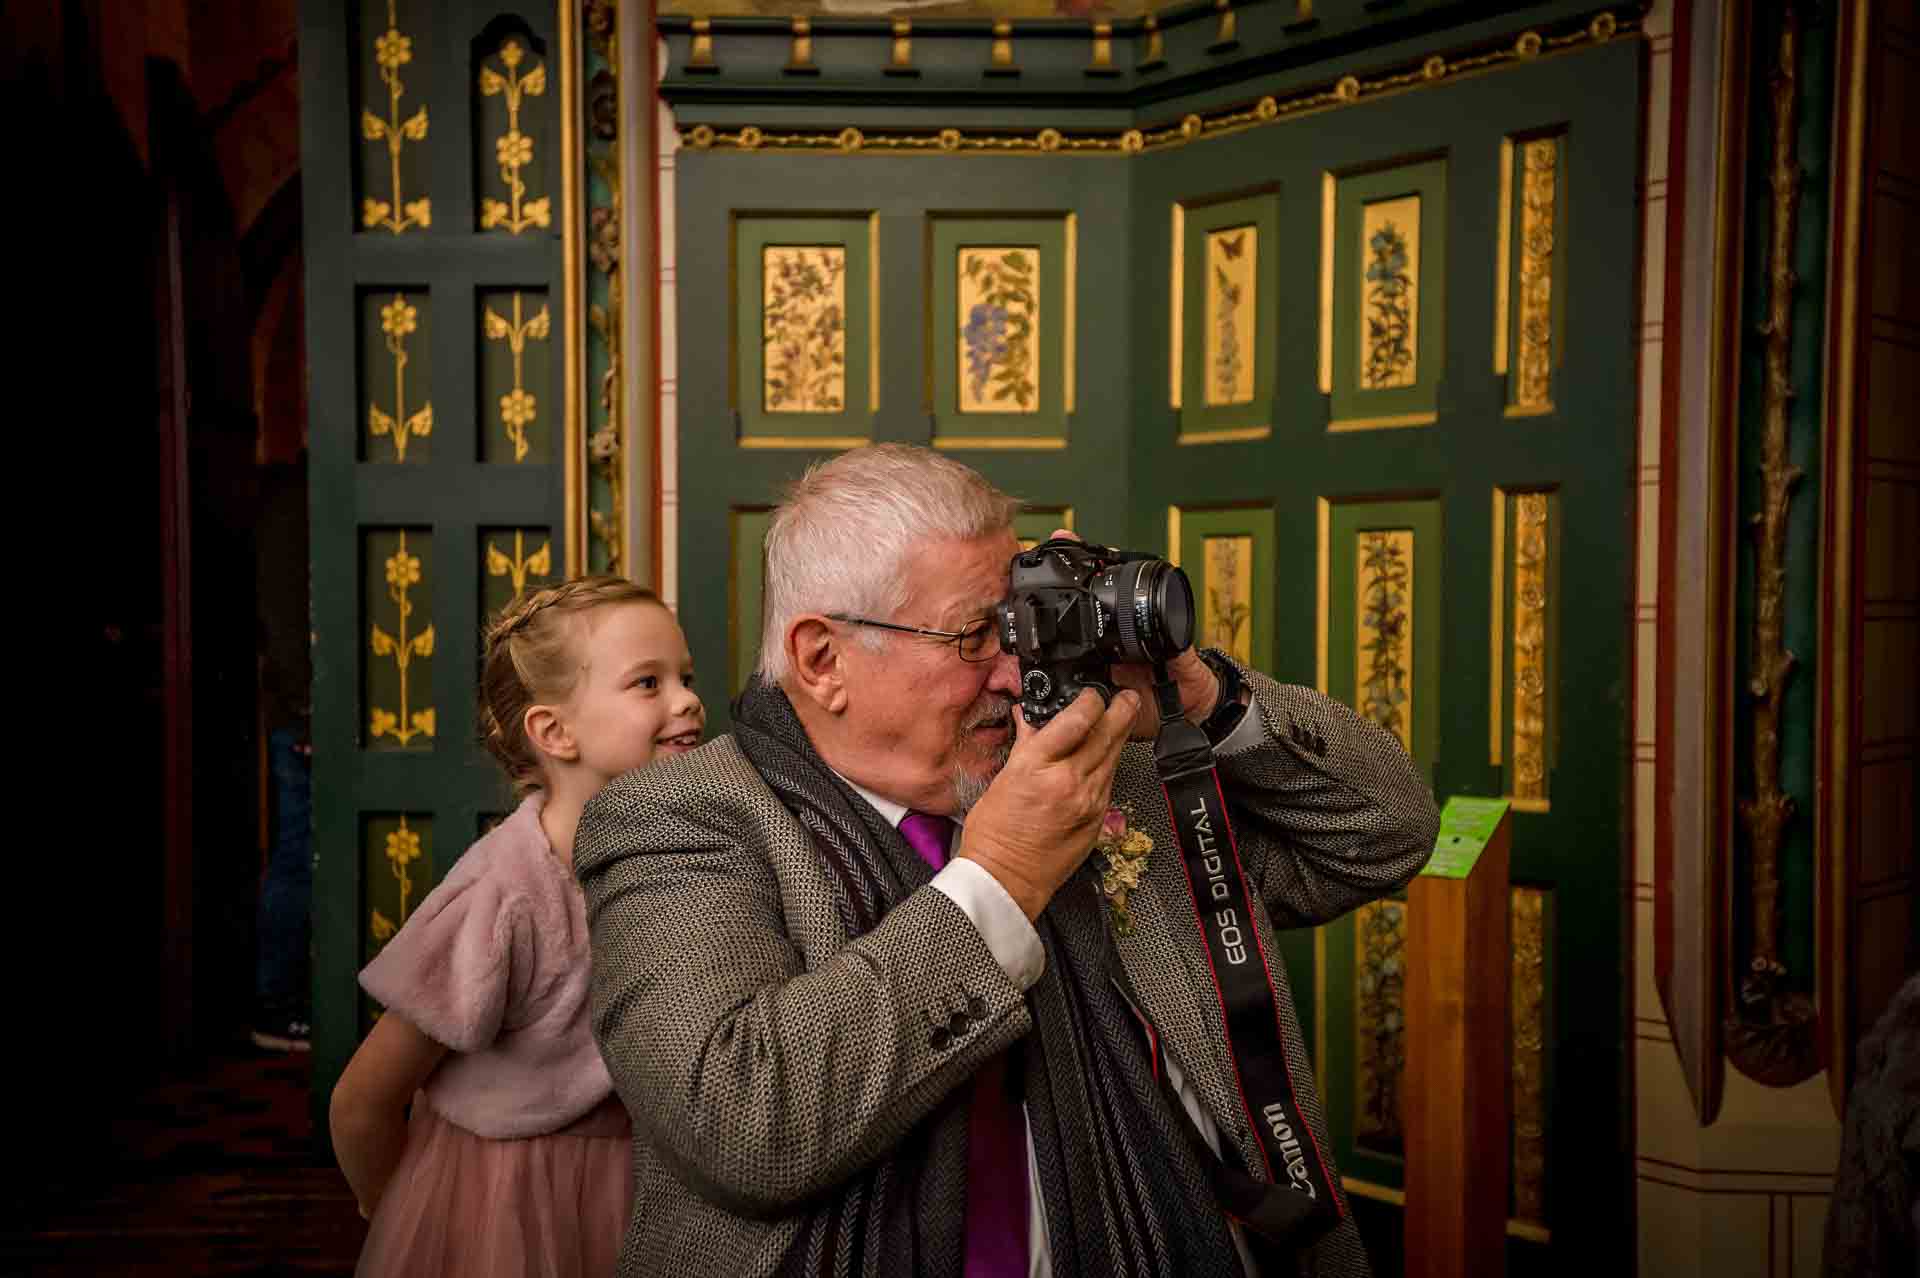 Grandfather takes photograph whilst granddaughter peers over his shoulder